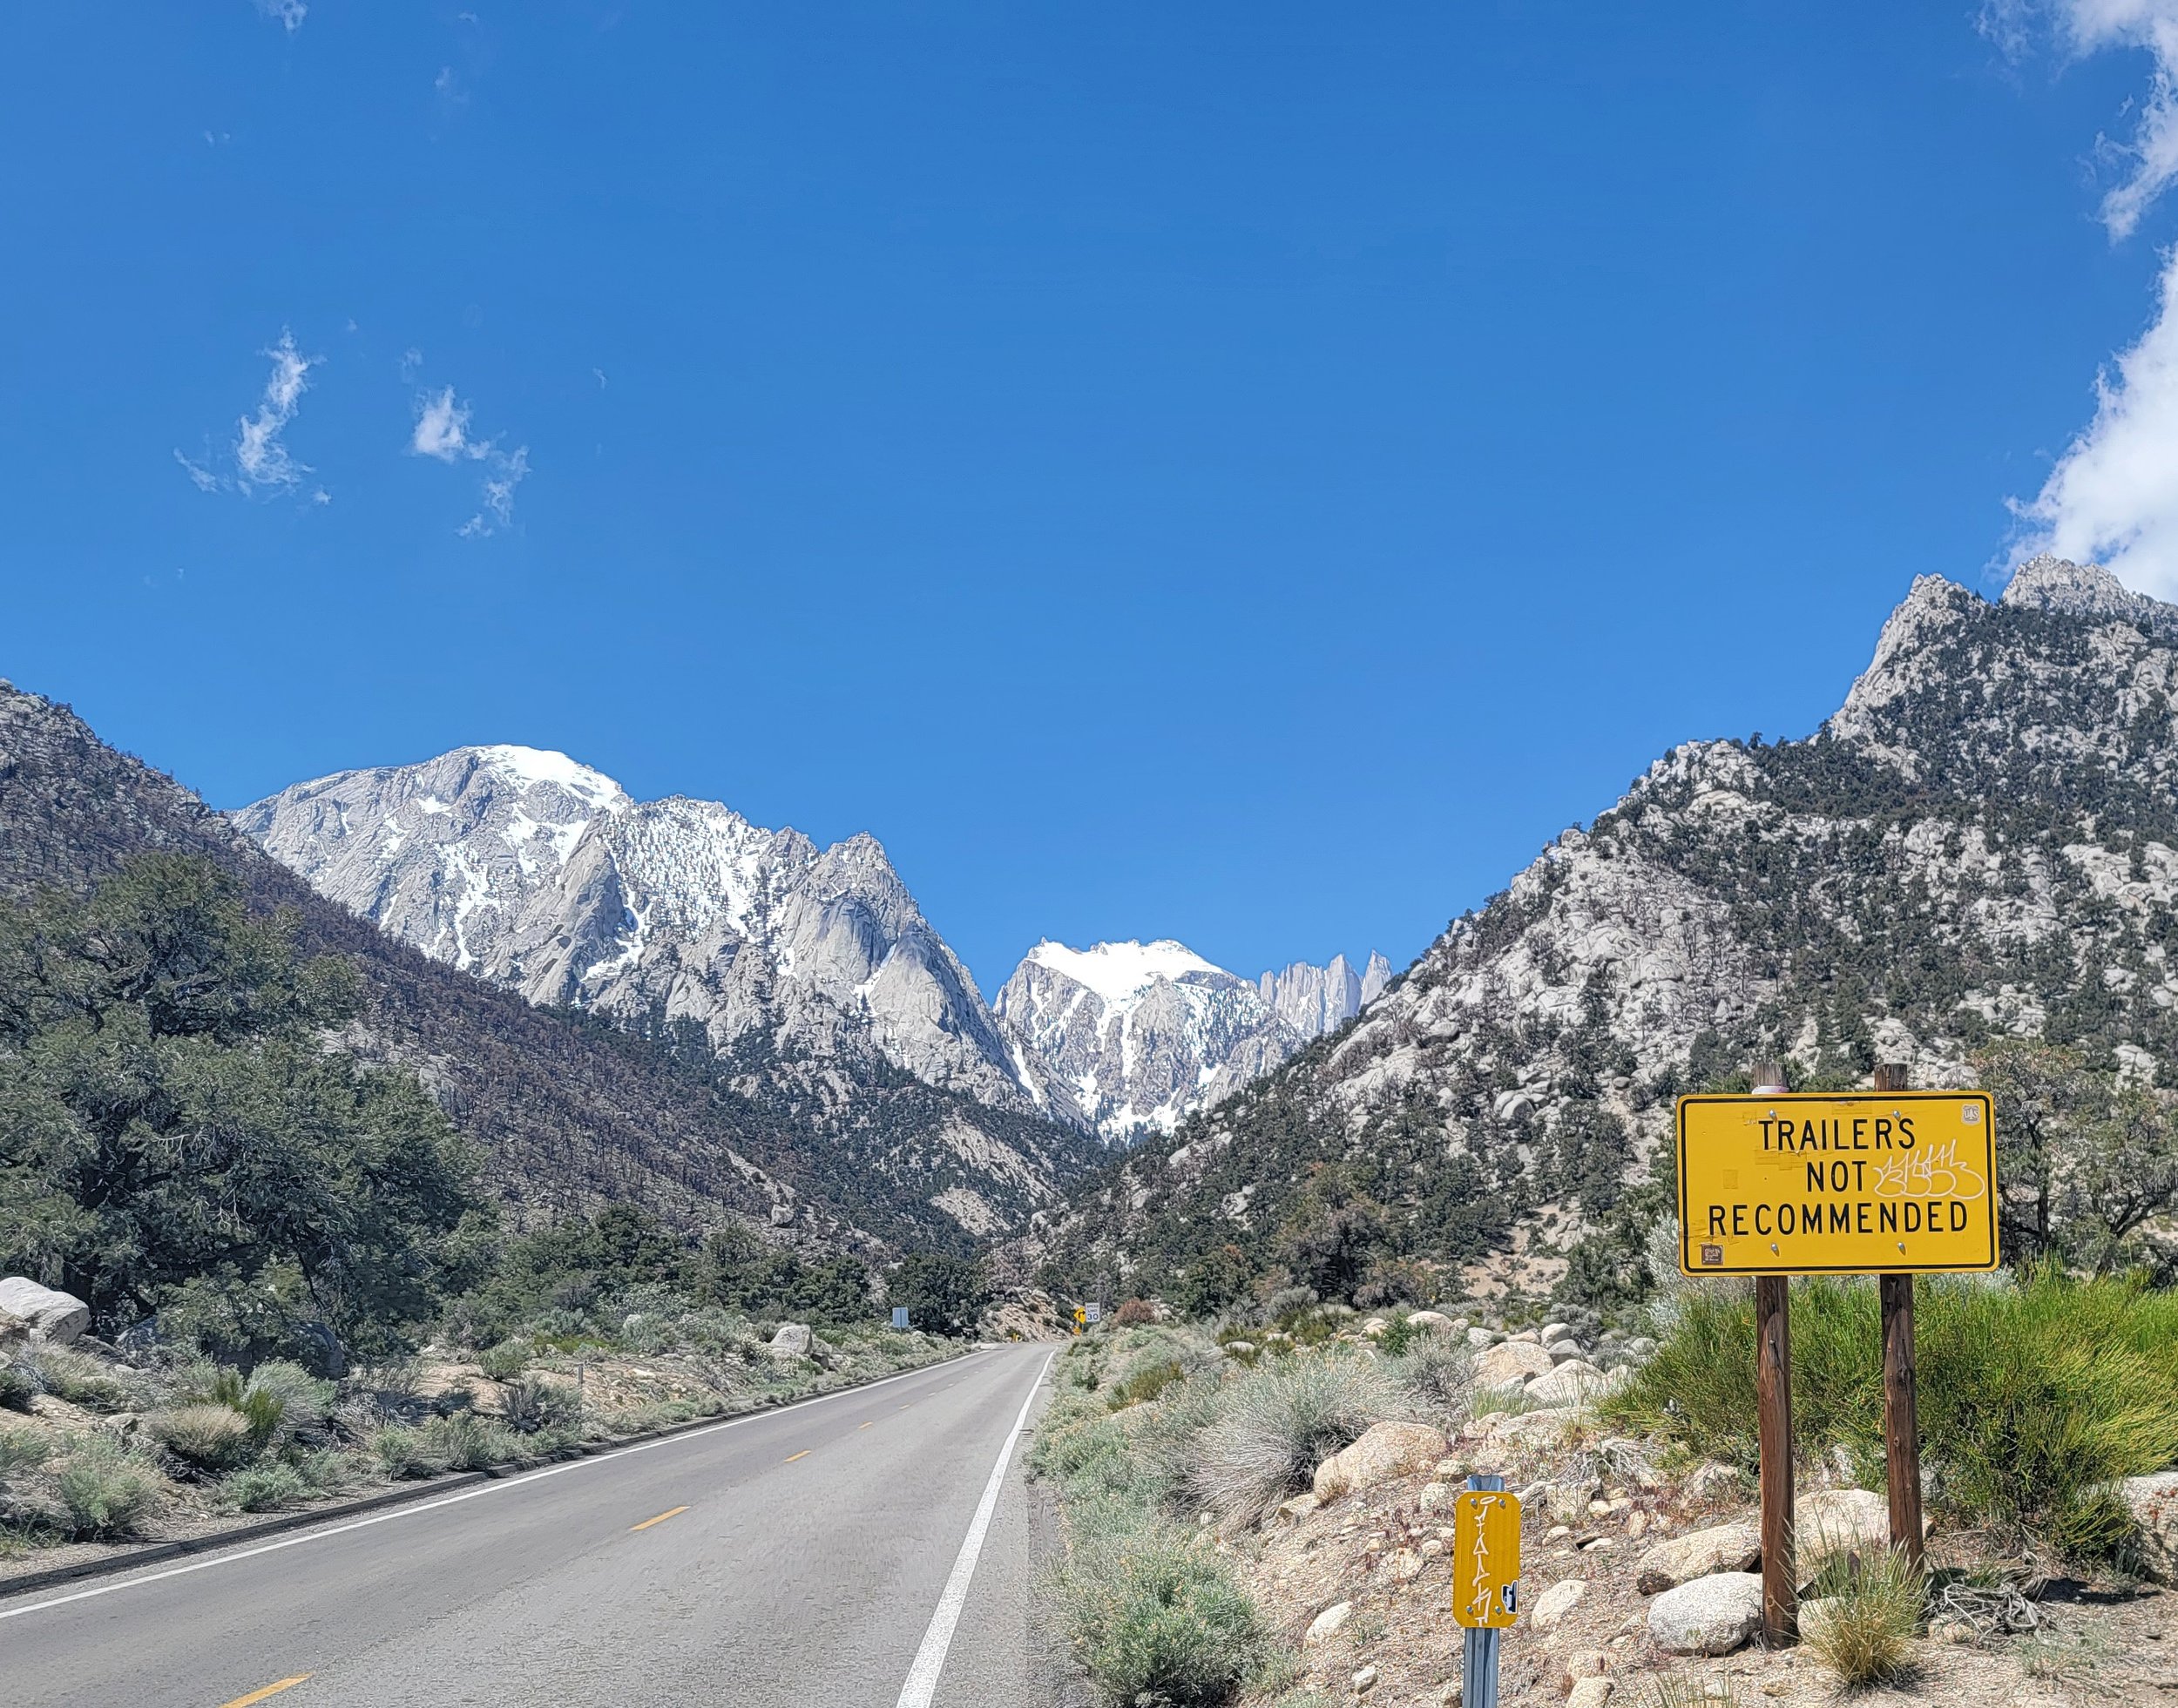 I love signs that just dispense good life advice. Mount Whitney in the middle there.